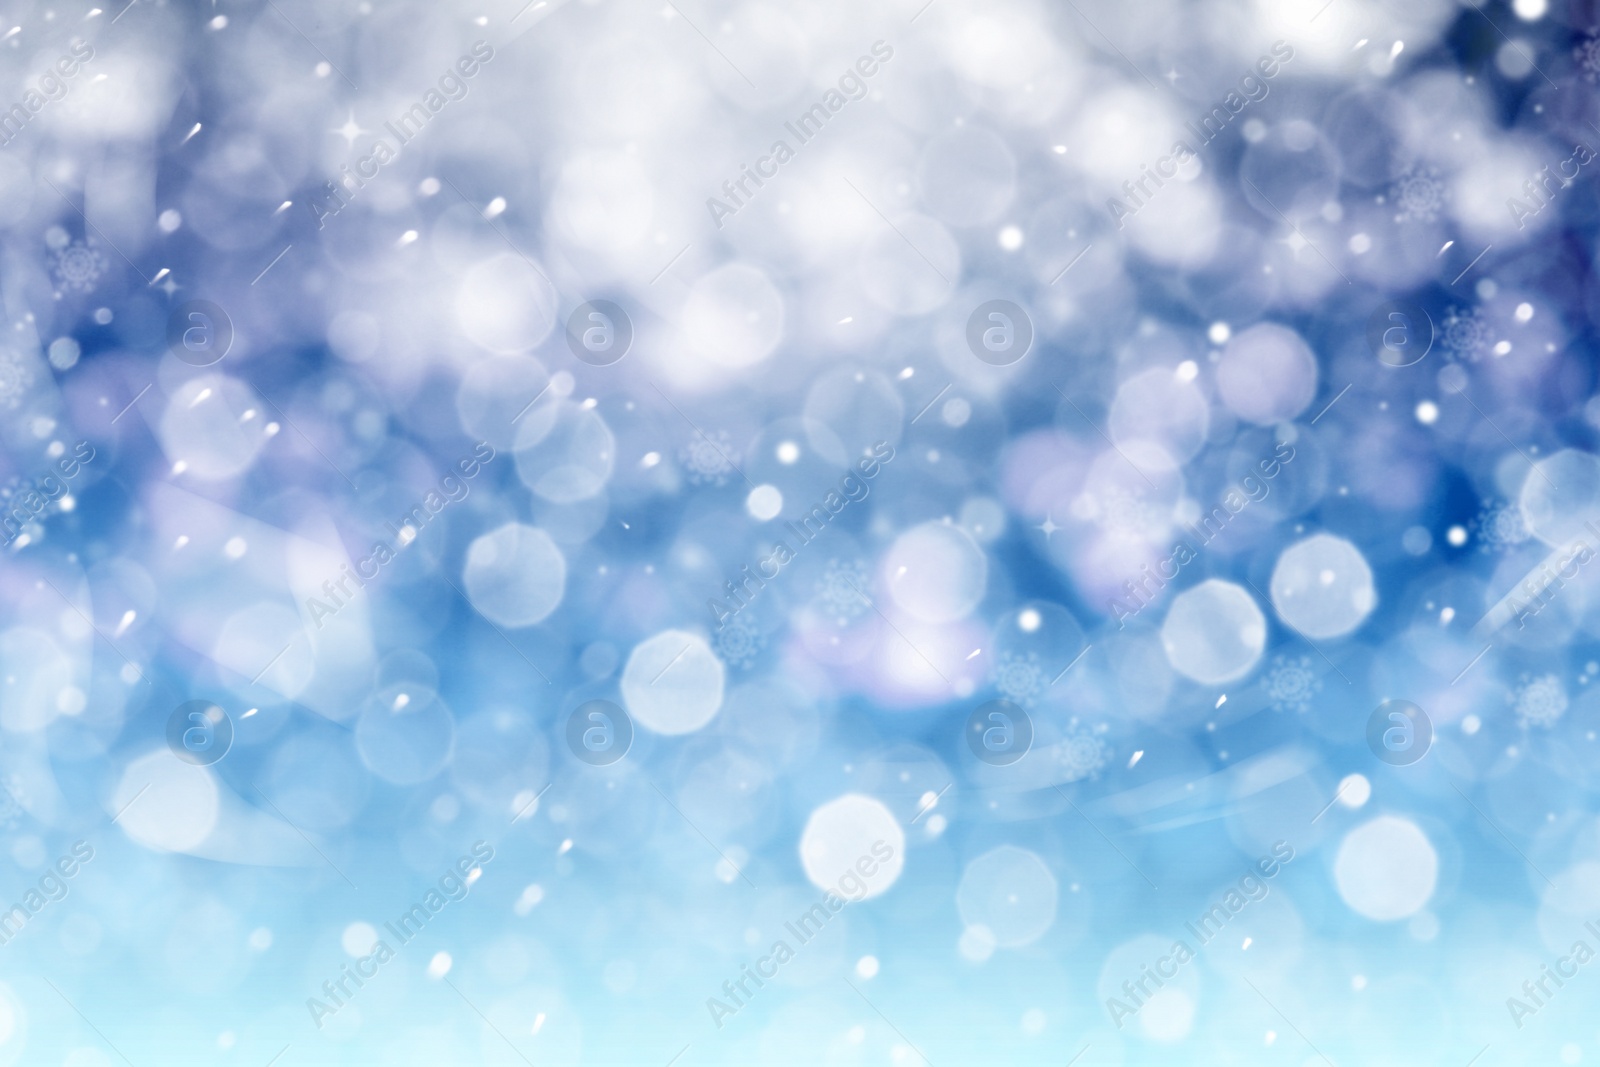 Image of Abstract snowfall on blue background, bokeh effect